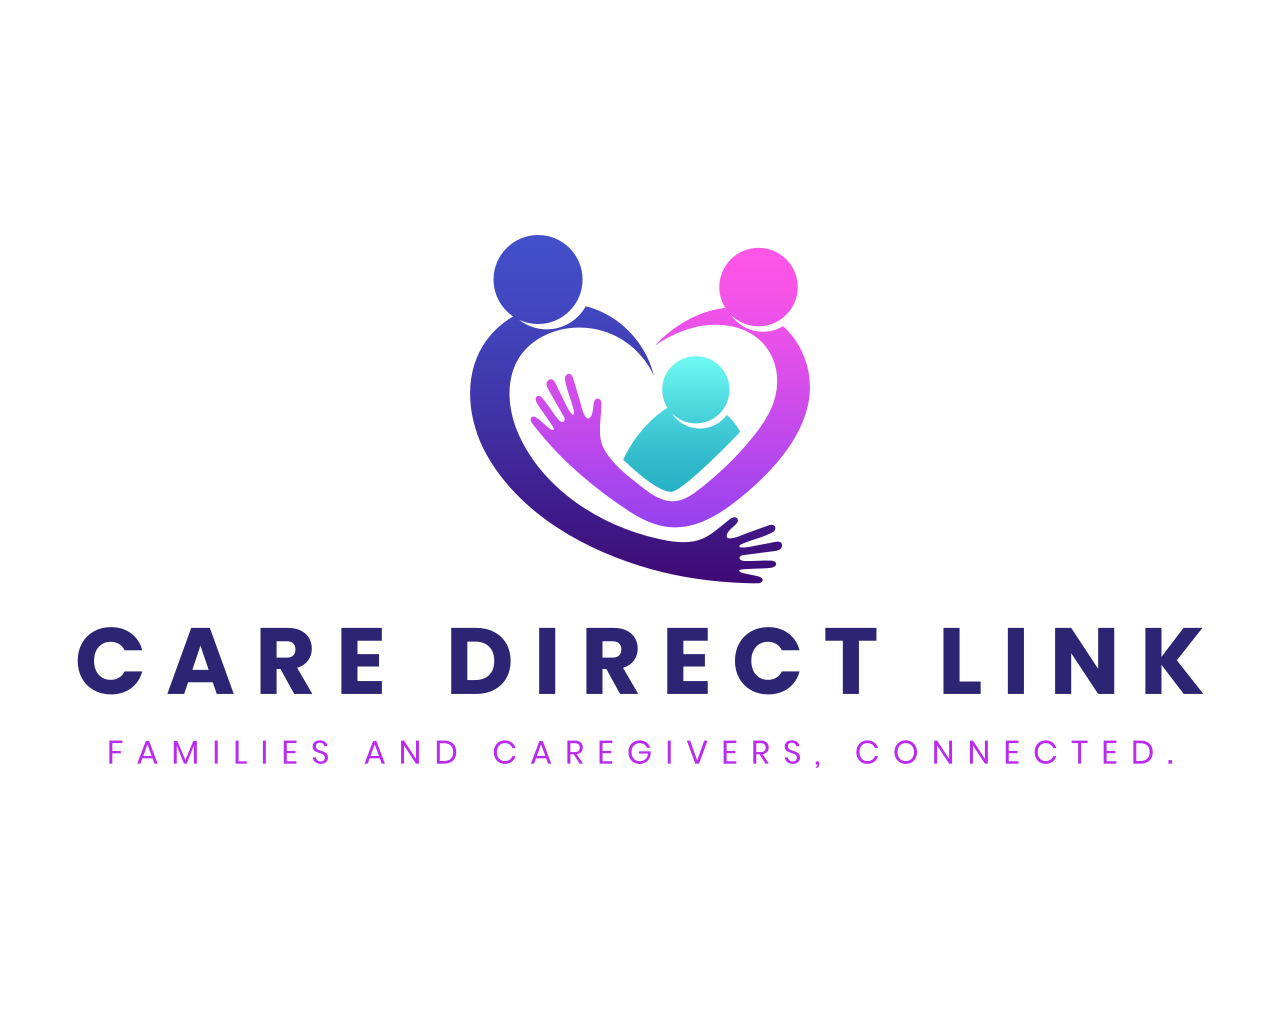 Care Direct Link